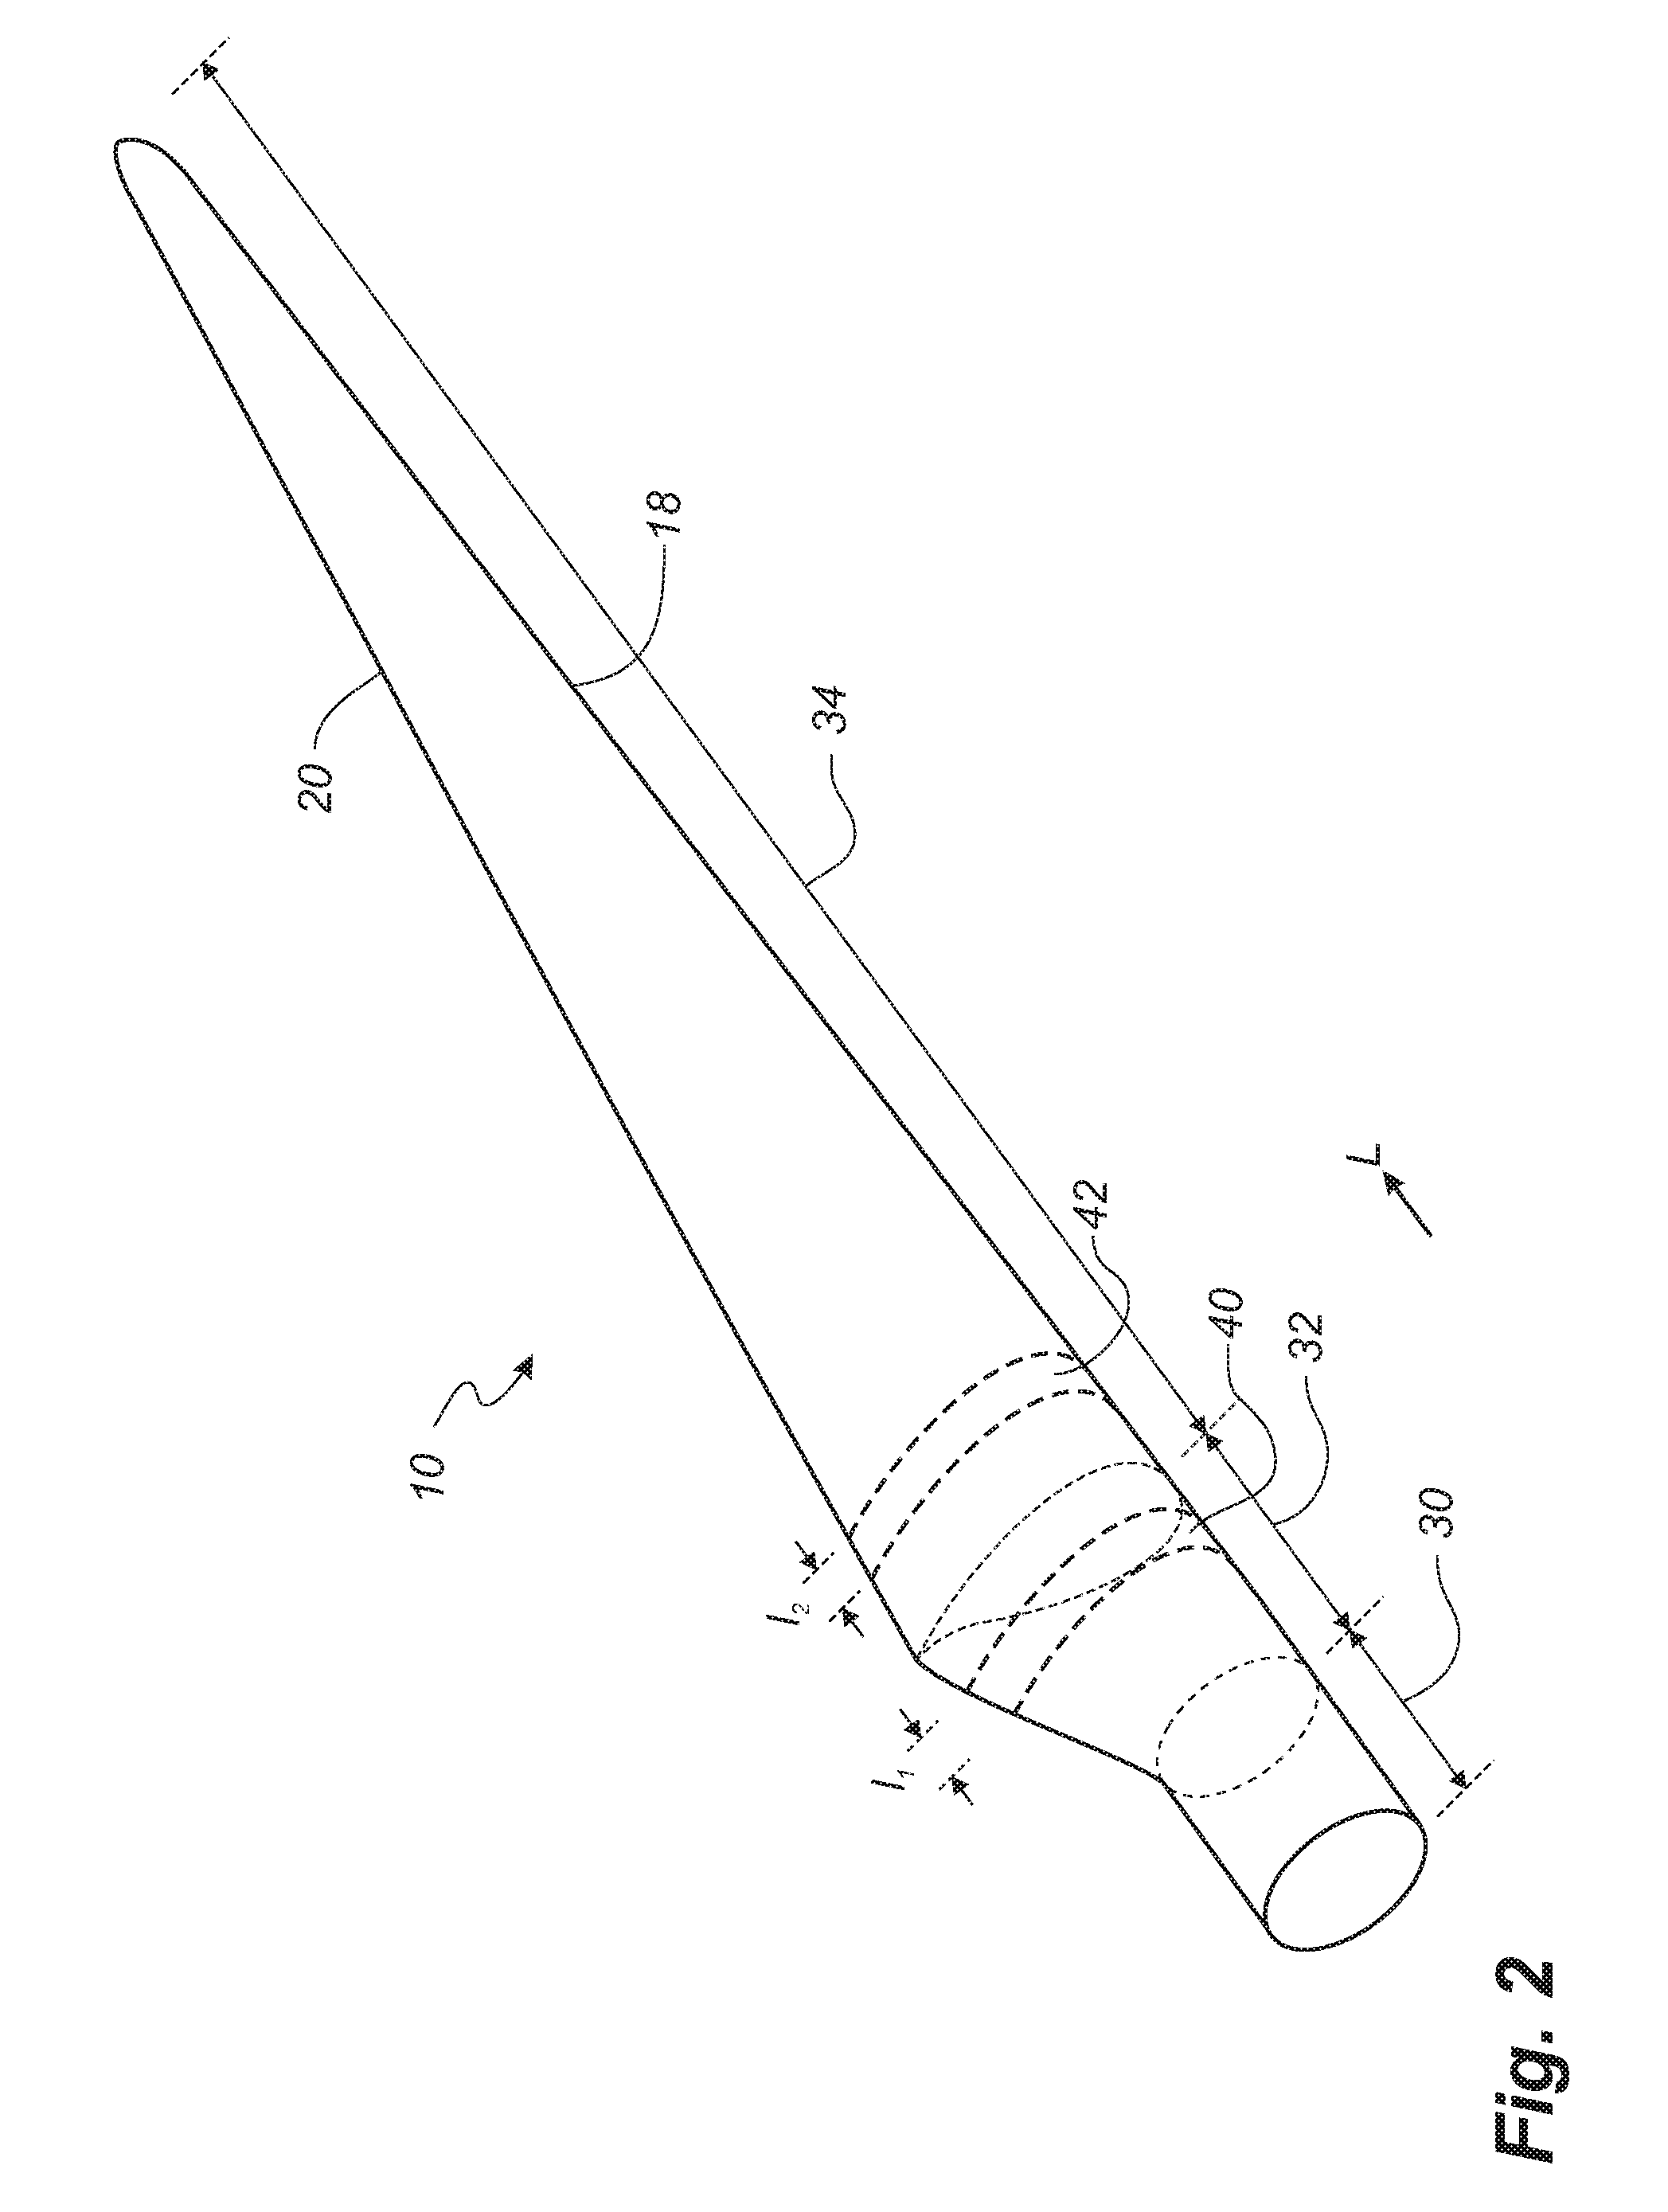 Blade for a rotor of a wind turbine provided with barrier generating means